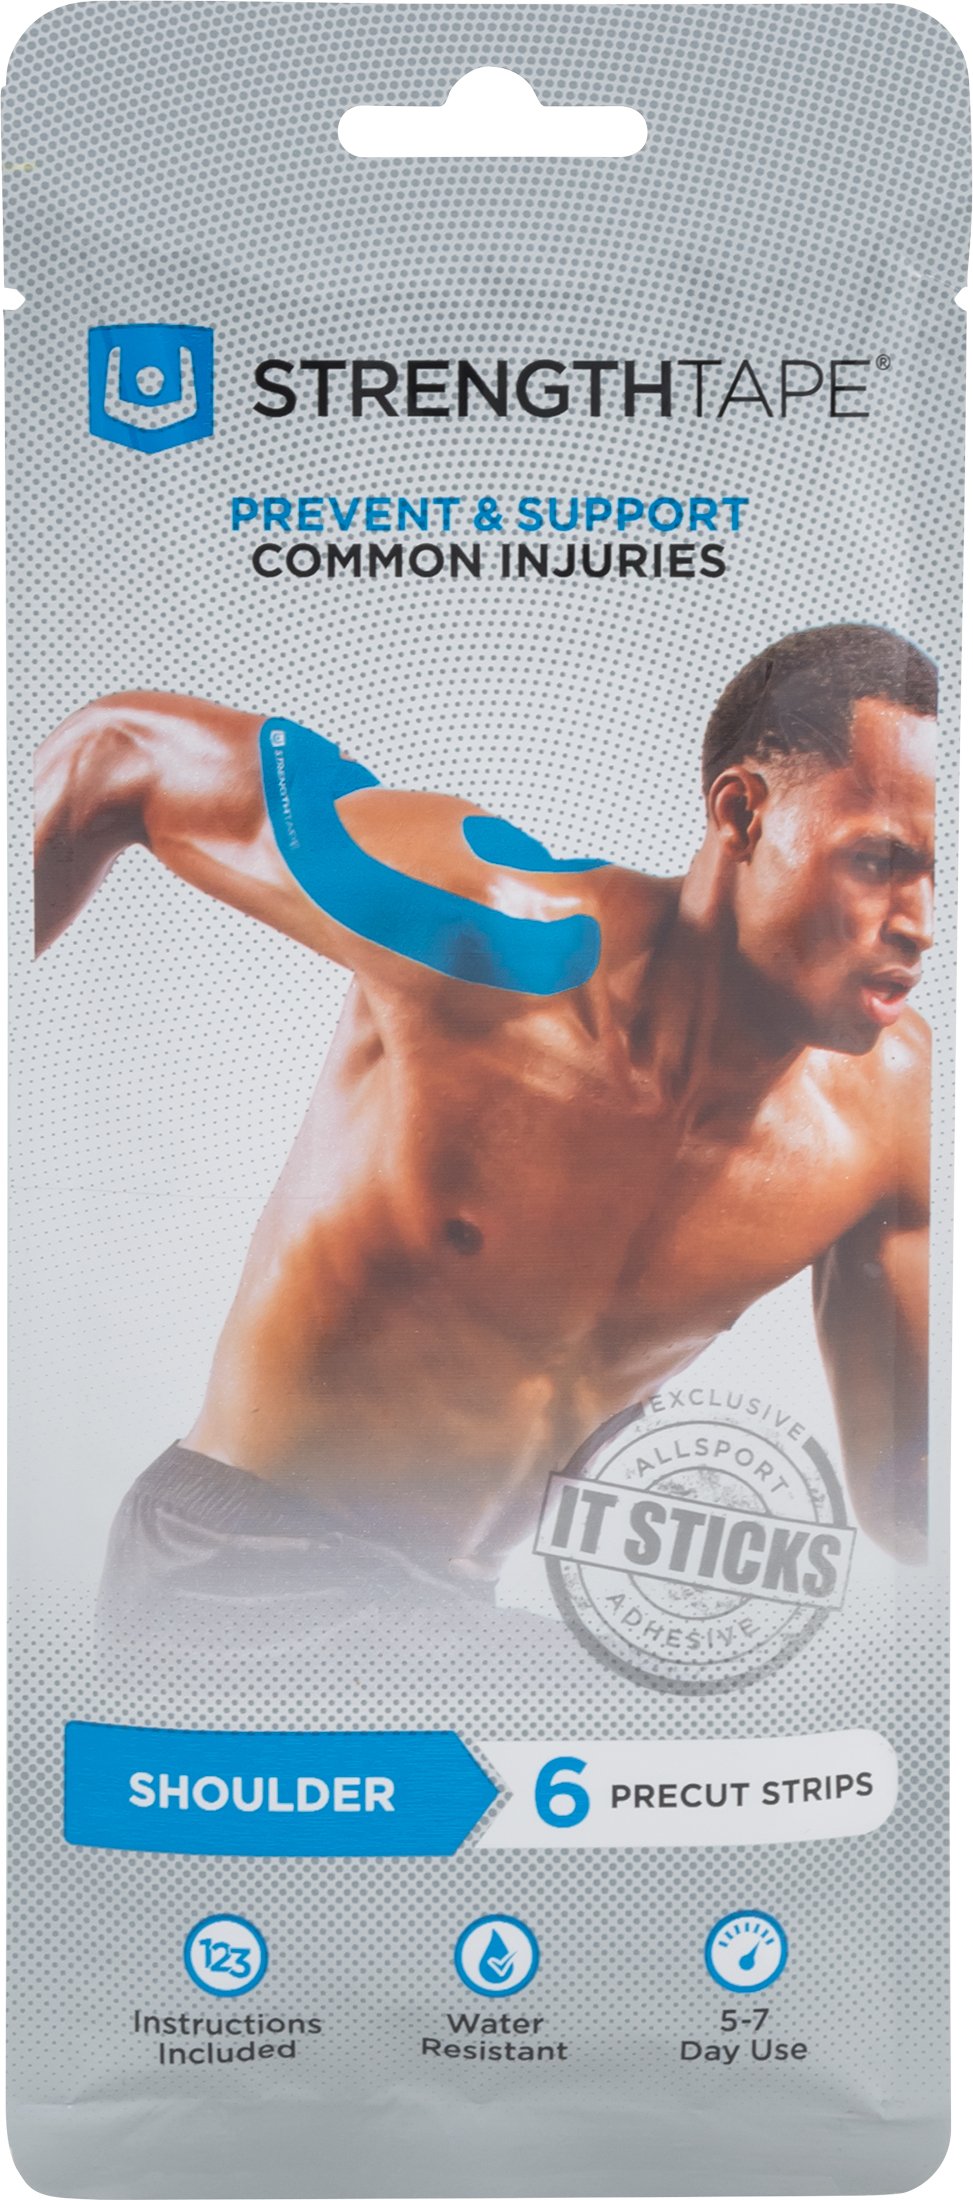 StrengthTape Kinesiology Tape, K Tape Taping Kits, Premium Sports Tape  Provides Support and Stability to The